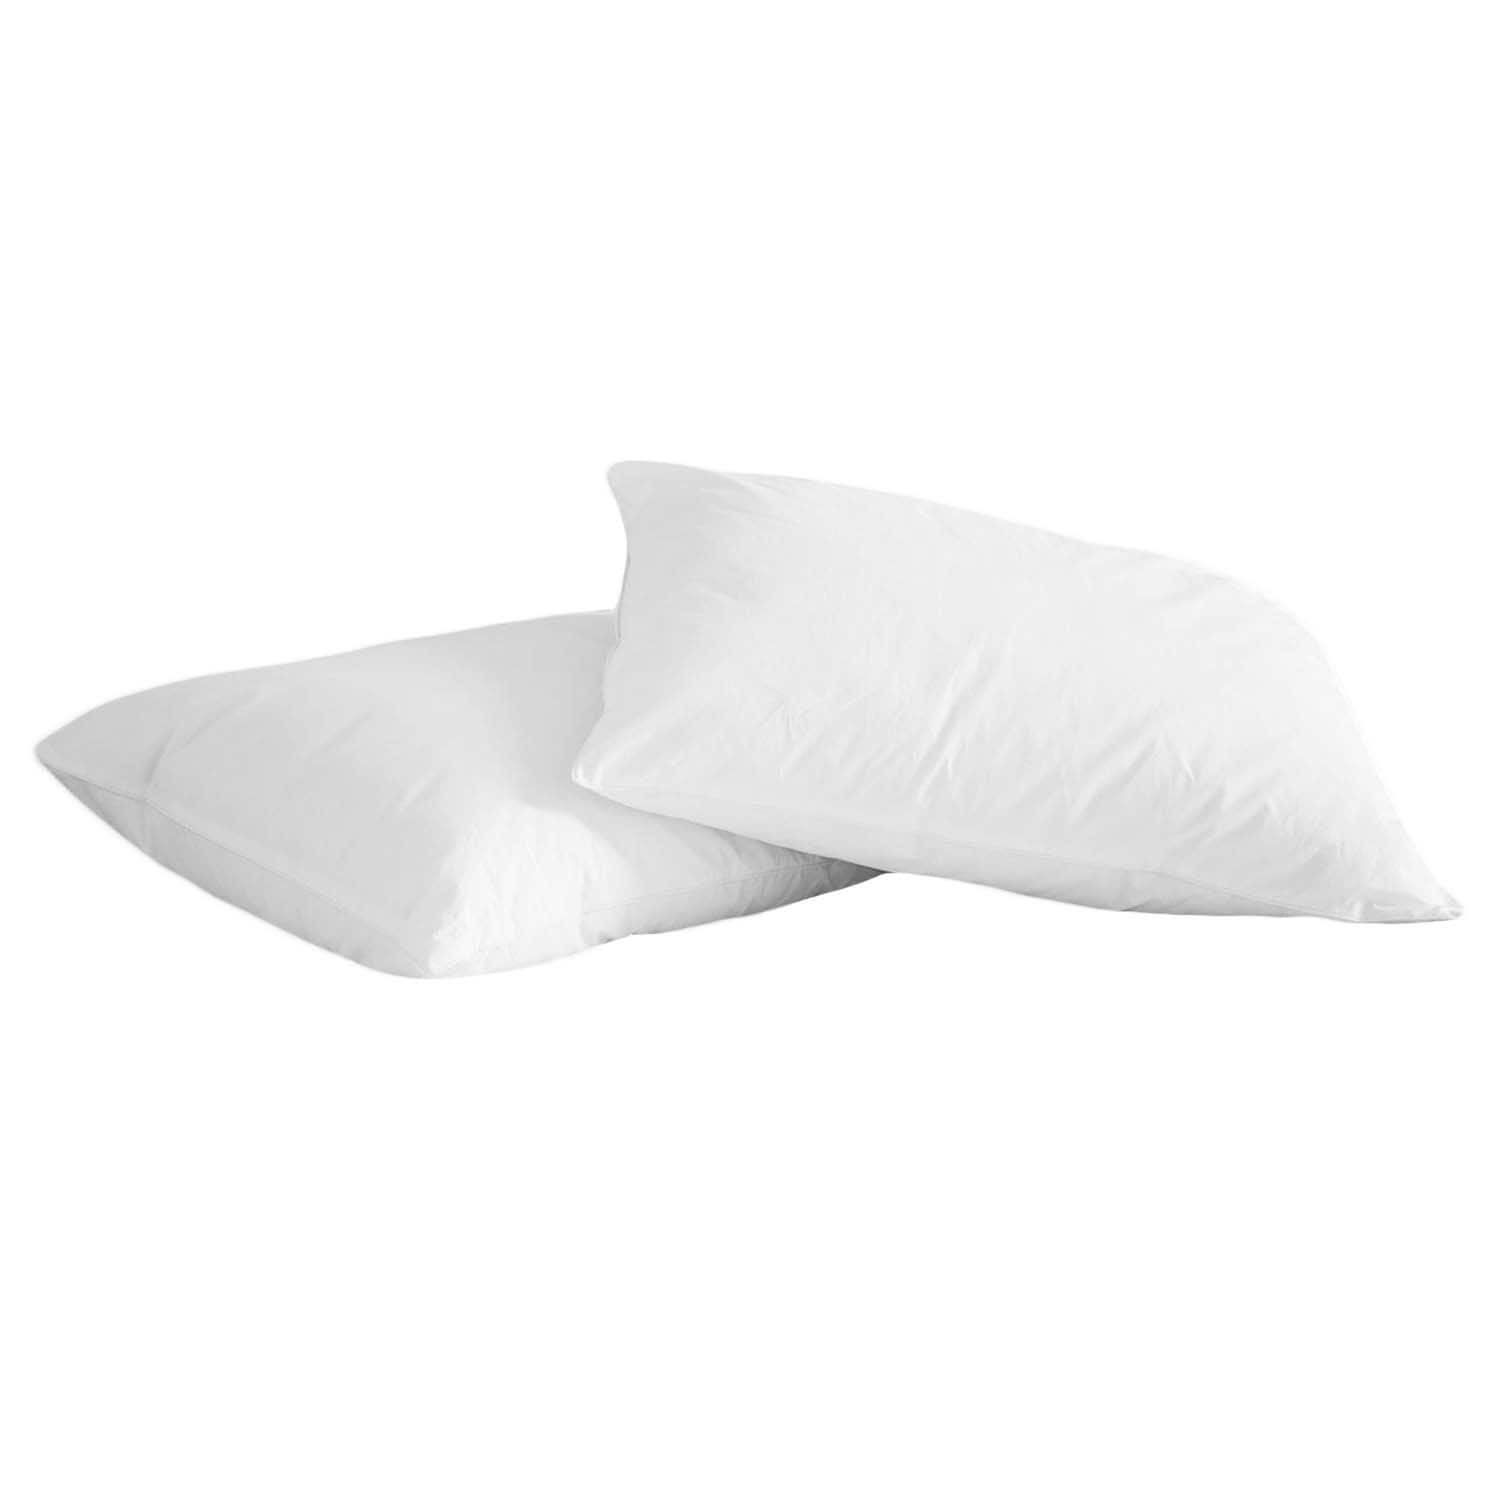 St. James Home Natural Memory White Duck Pillow, White, 2 Pack, Jumbo Size - image 3 of 4